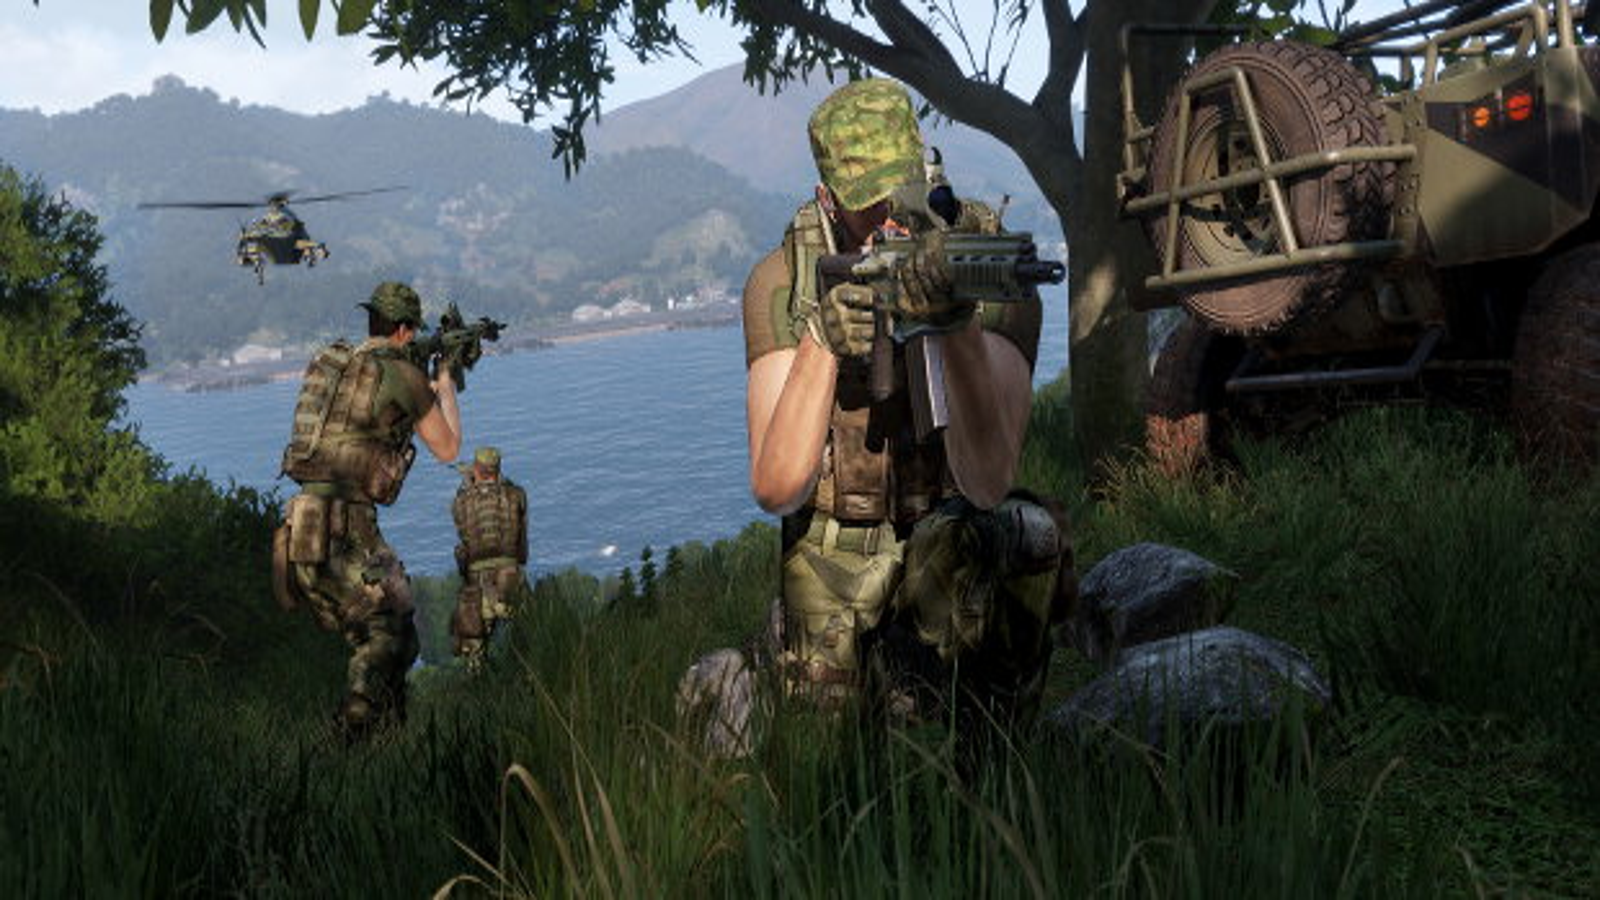 Next Arma 3 expansion launches January 21 - GameSpot